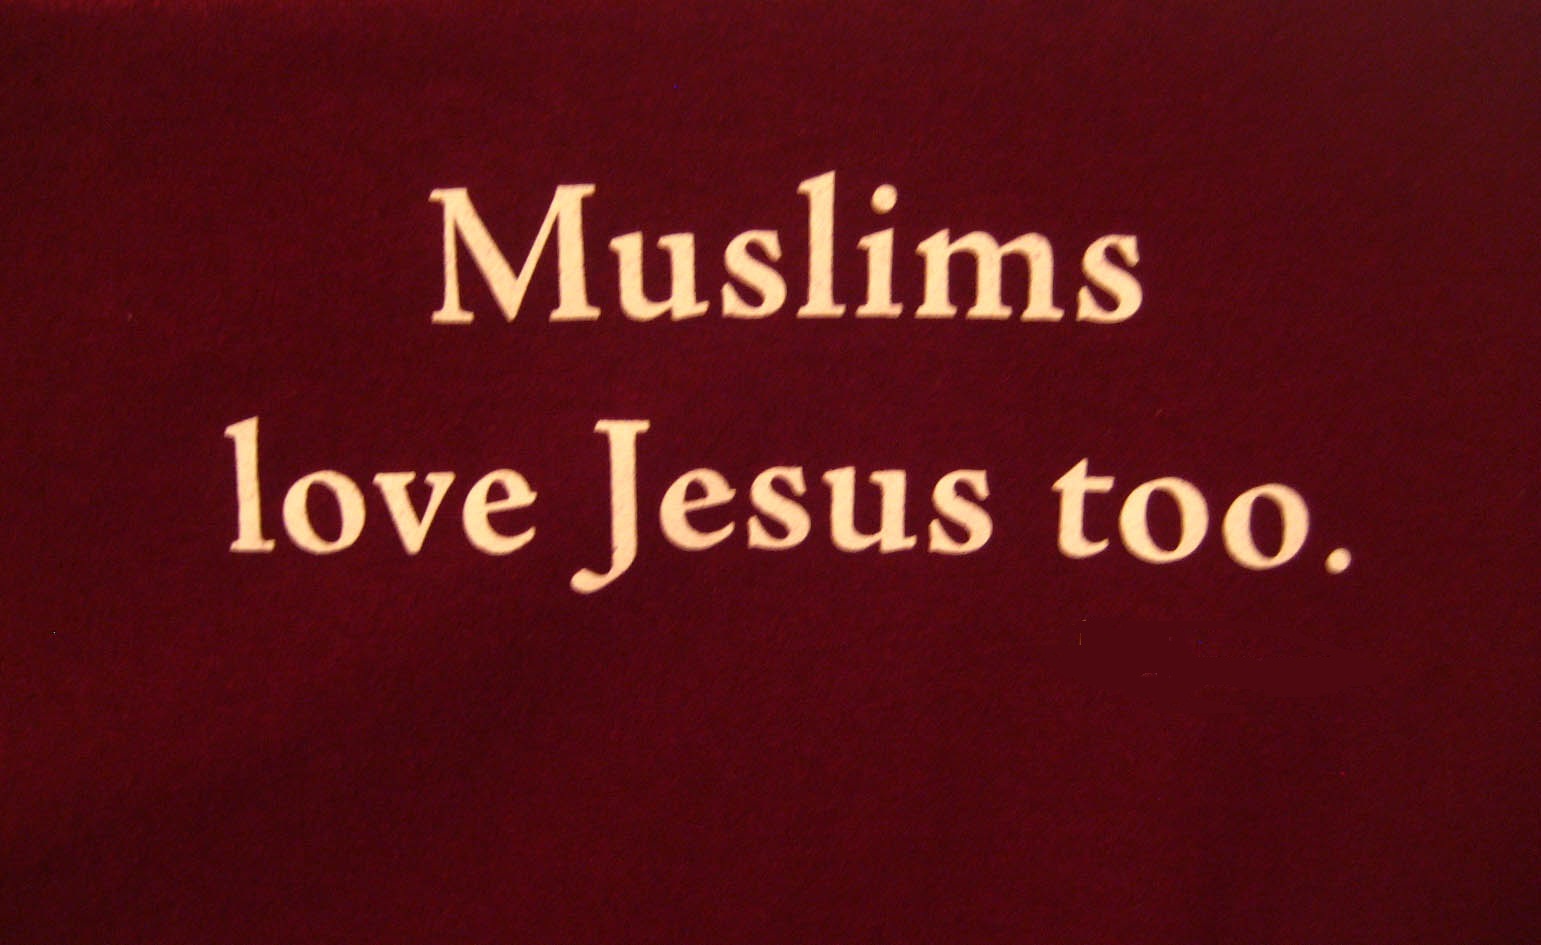 What Are the Rights of Jesus upon Muslims